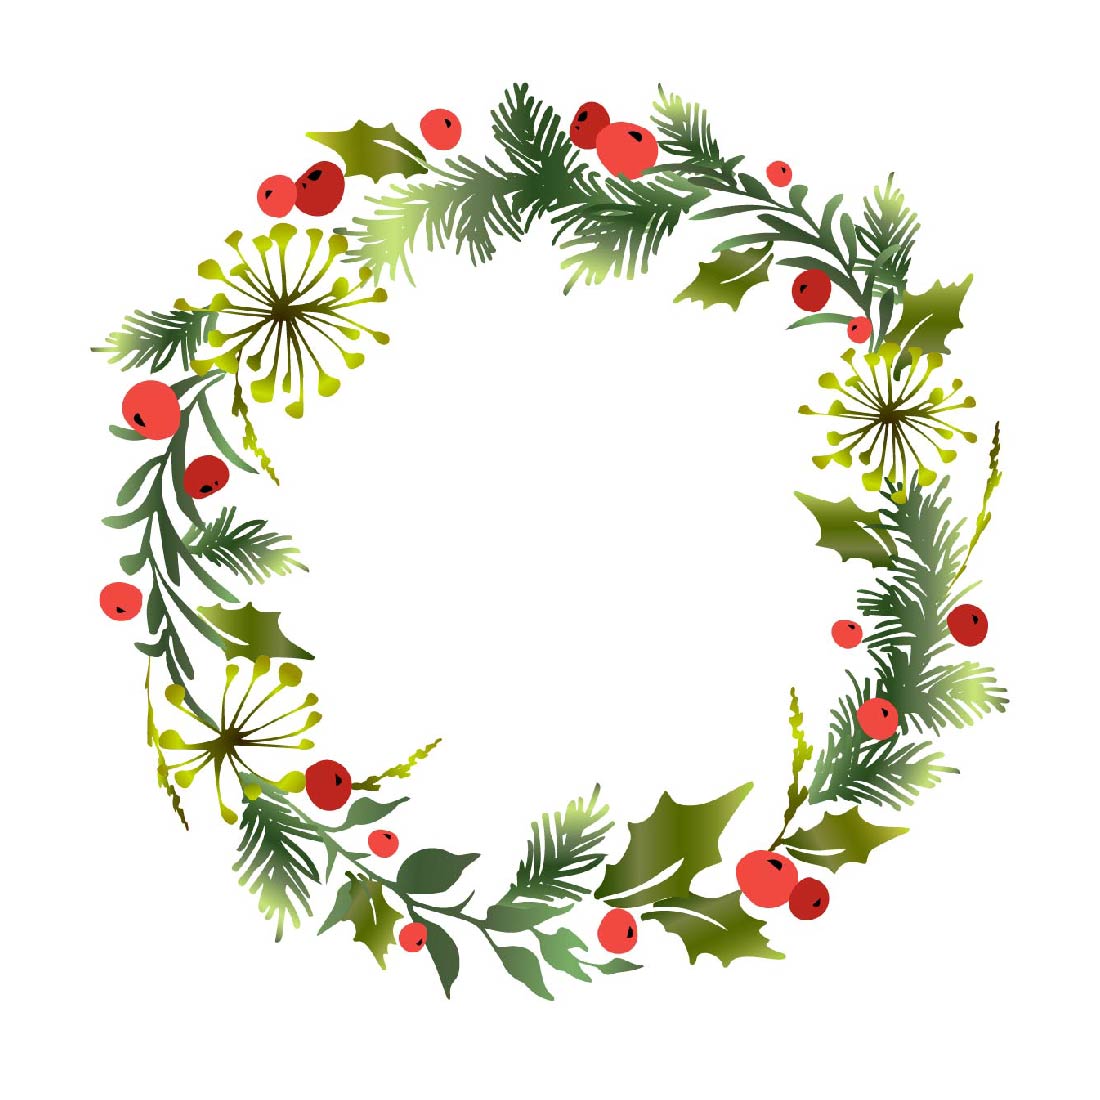 Colorful image with decorative Christmas wreath with mistletoe leaves, fir branches and holly berries.